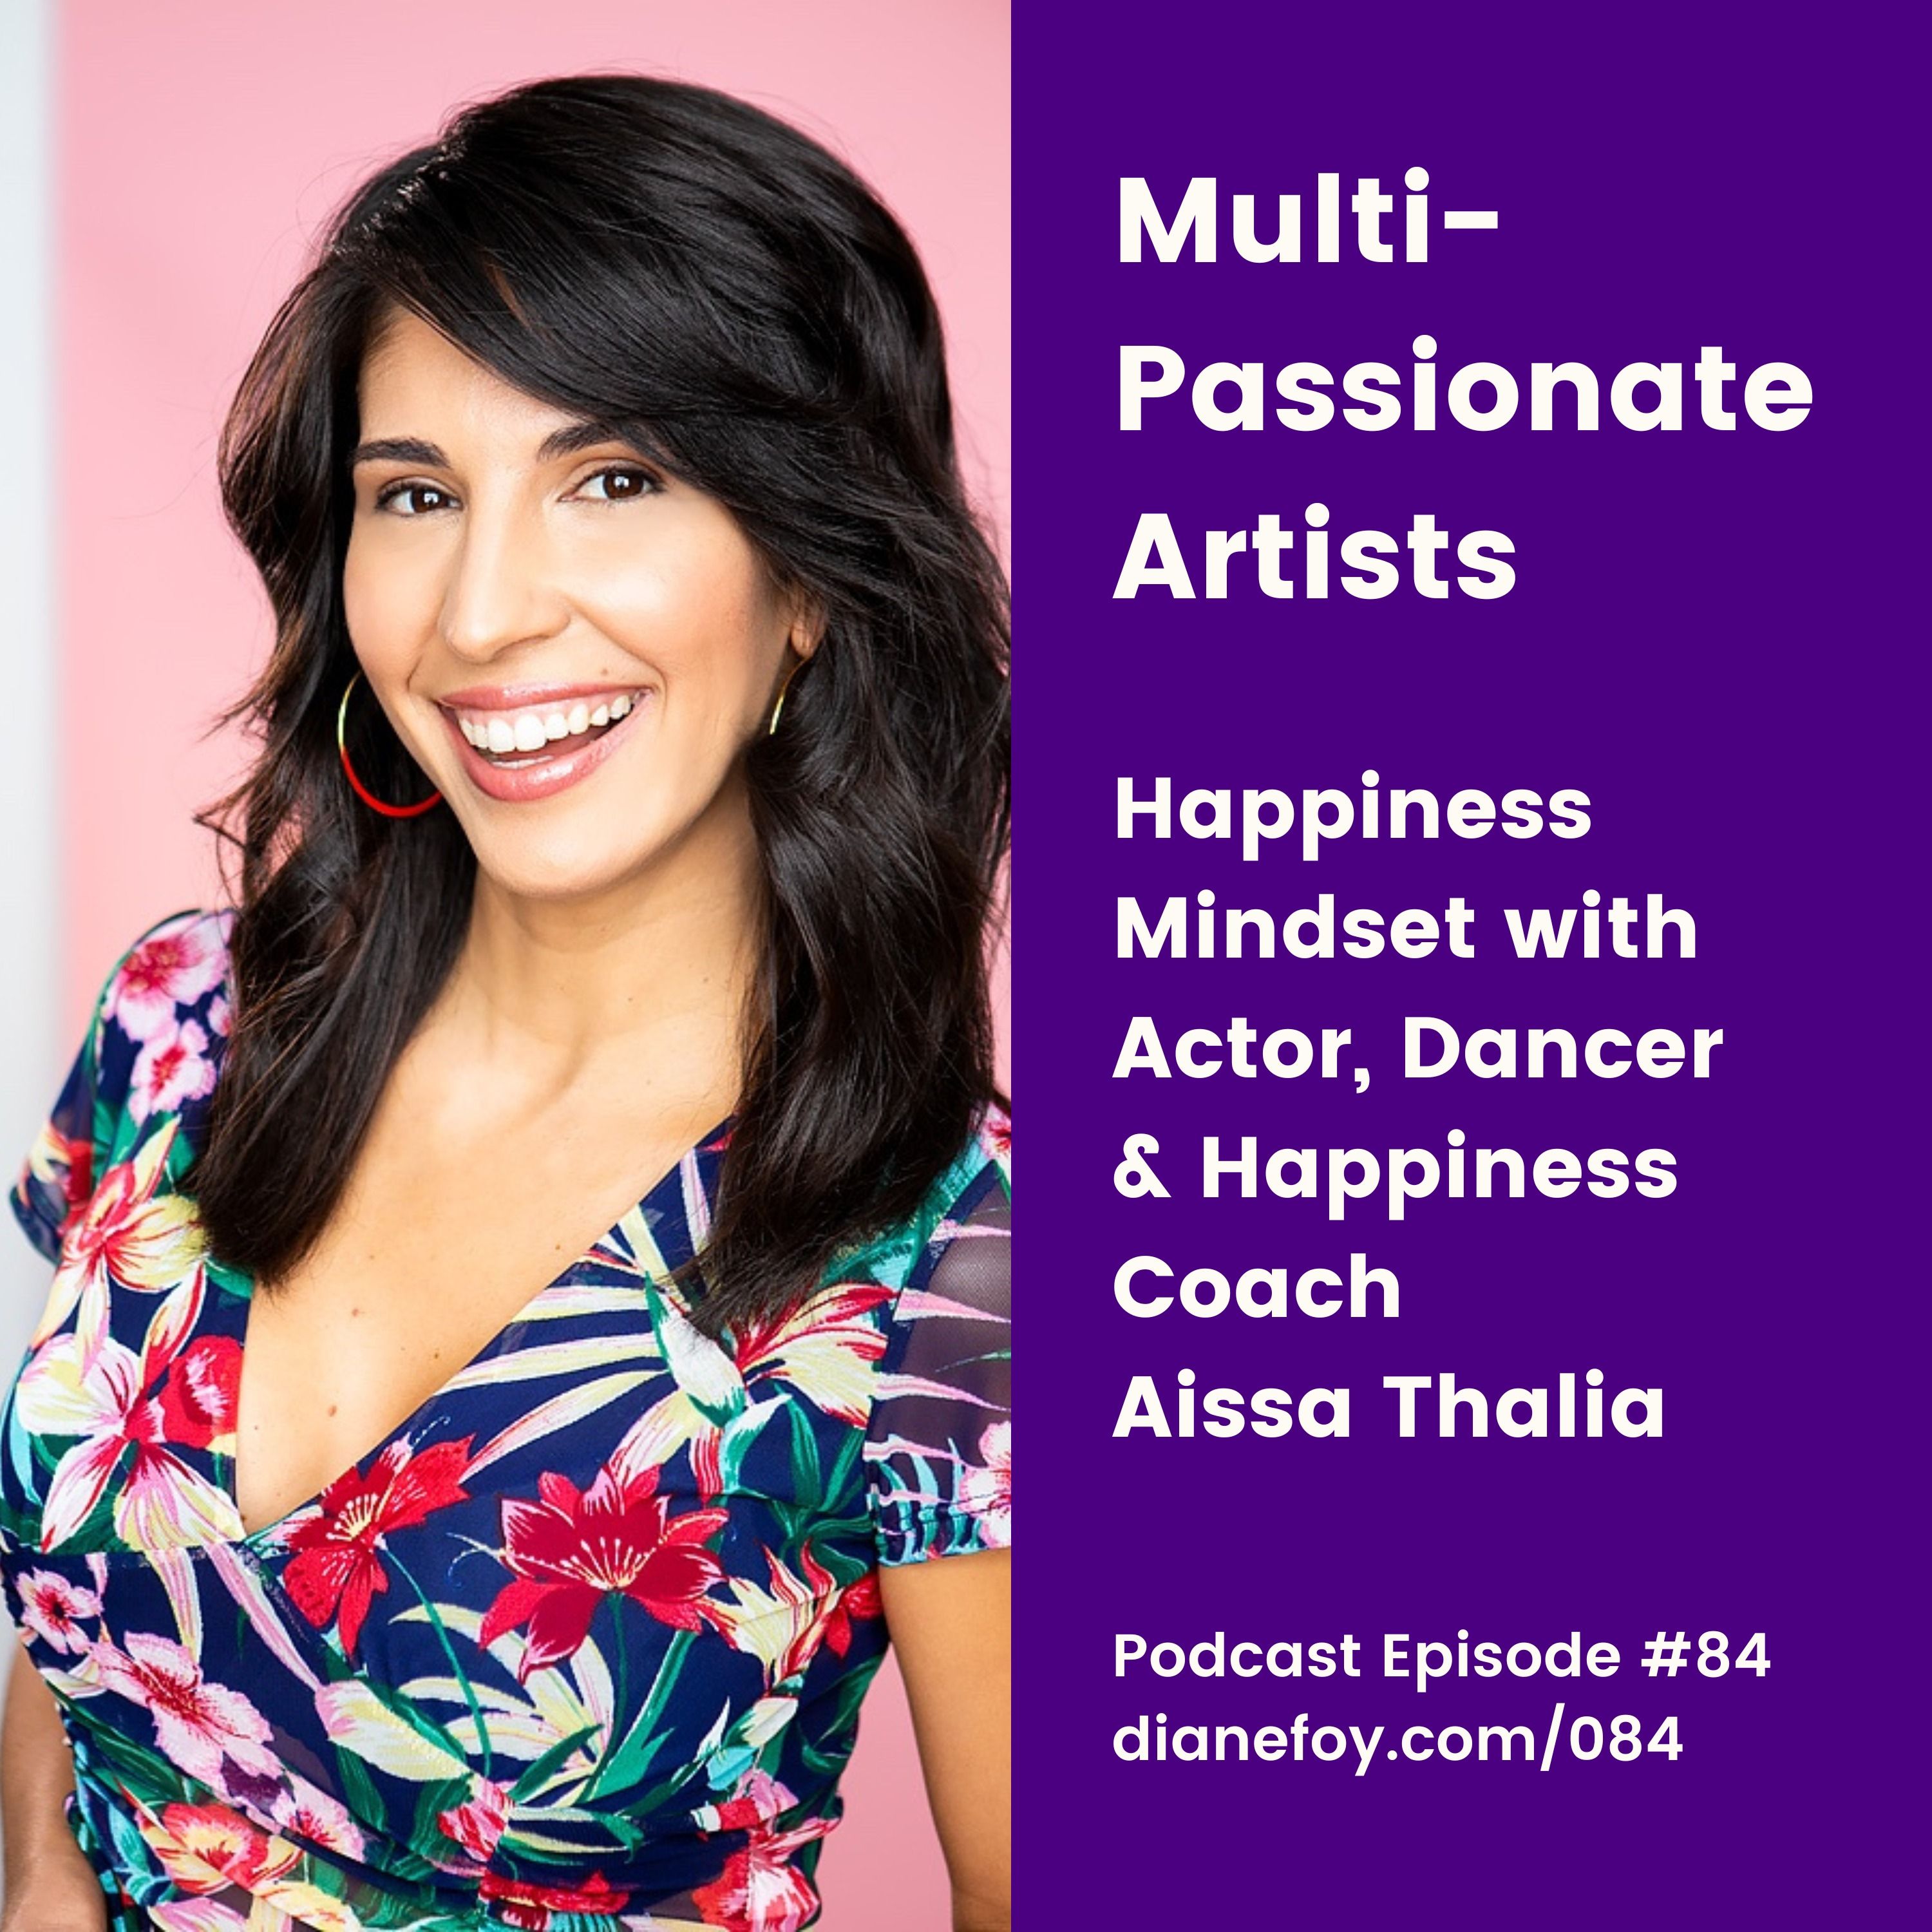 Happiness Mindset with Actor, Dancer & Happiness Coach Aissa Thalia